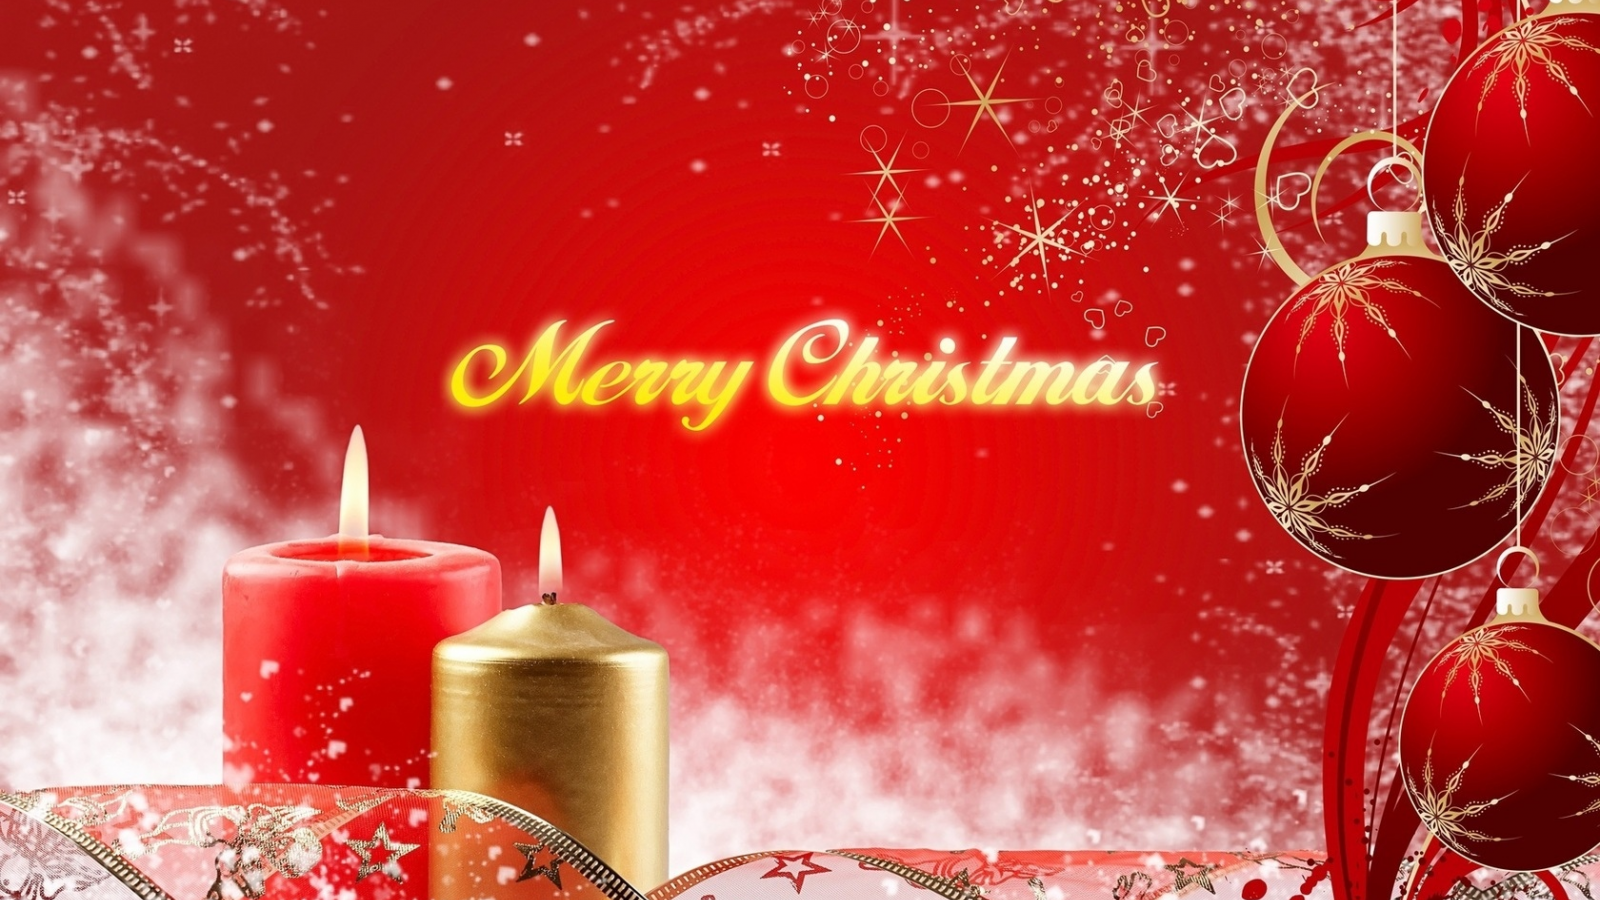 wishes, happines, holliday, merry, christmas